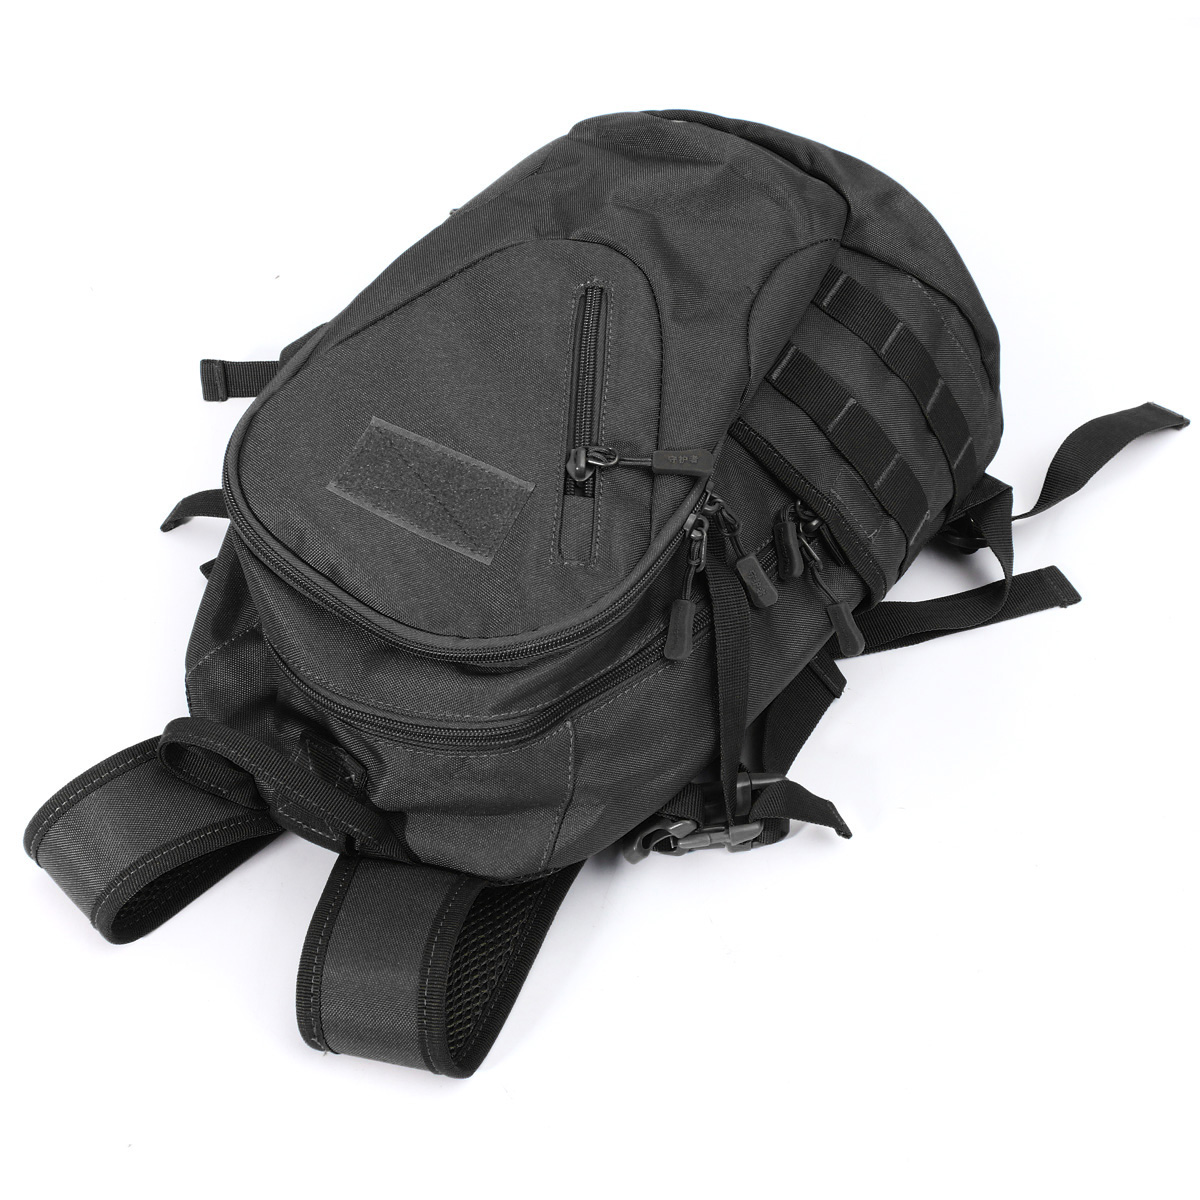 Ultralight-Molle-Tactical-Backpack-800D-Oxford-Military-Hiking-Bicycle-Backpack-Outdoor-Sports-Cycli-1817007-4